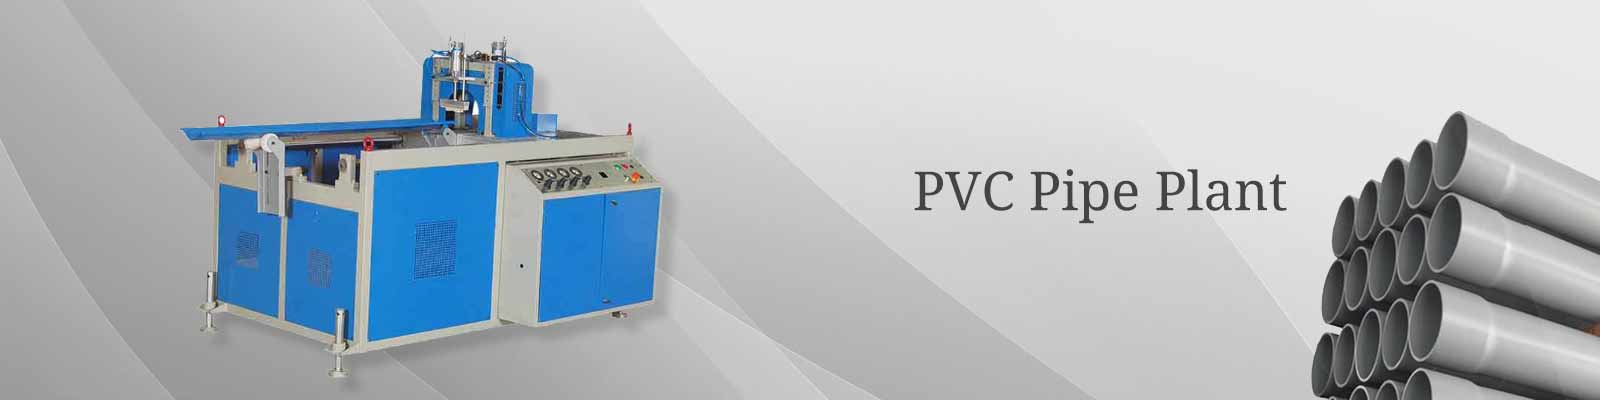 Pvc Pipe Extrusion Plant,Mixer Machine,Line,Extruder,Machinery